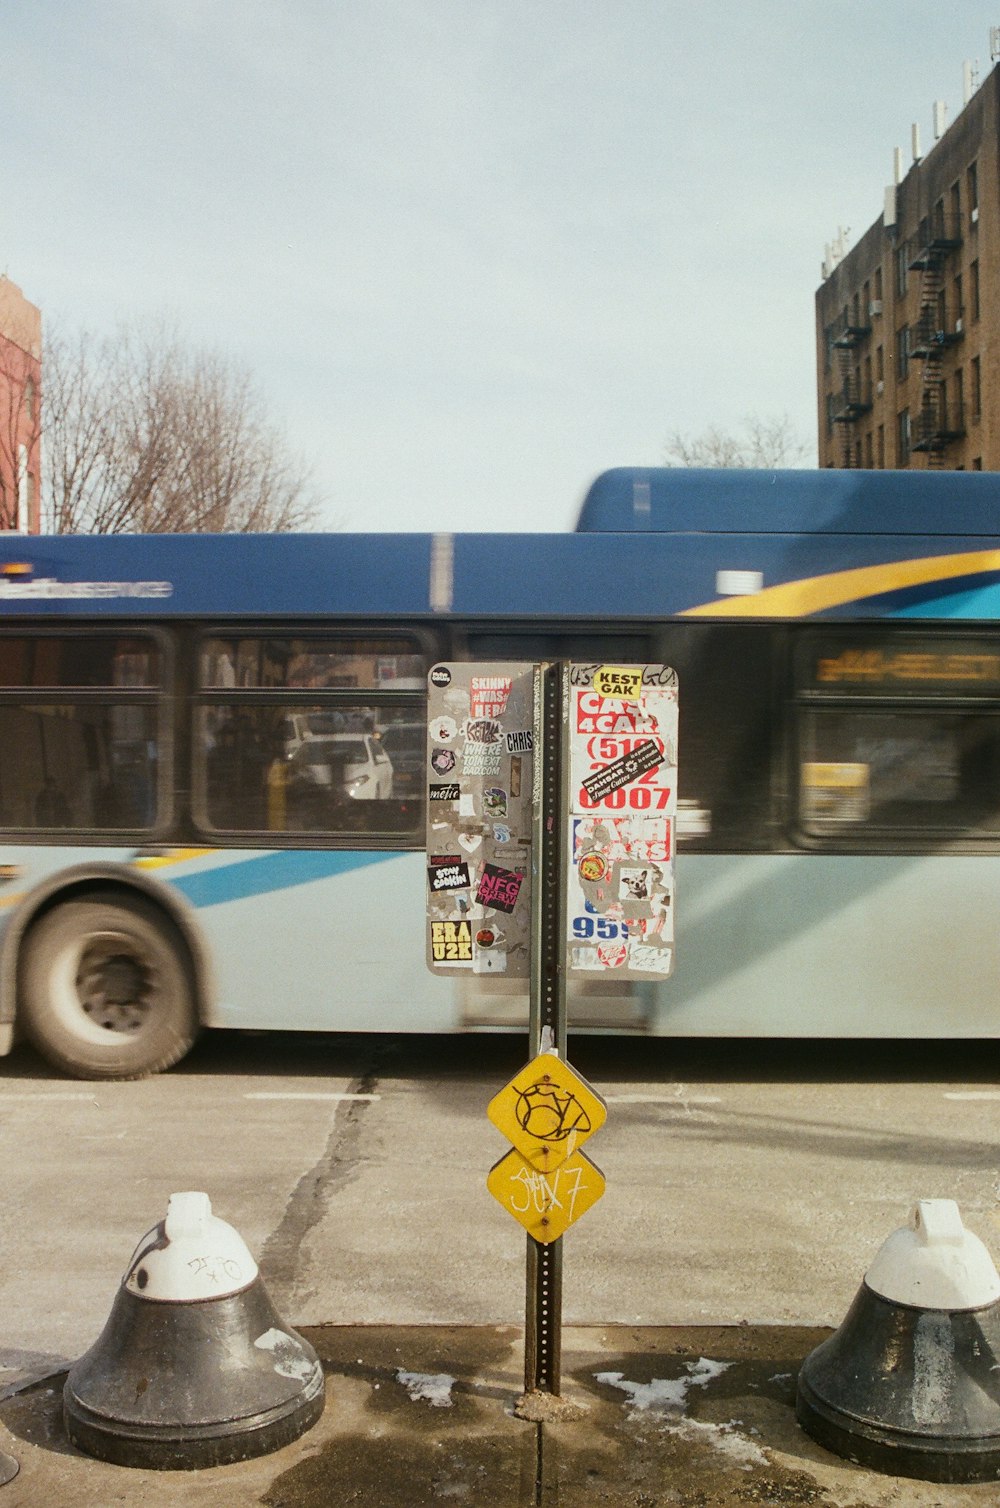 a bus driving down a street next to a parking meter